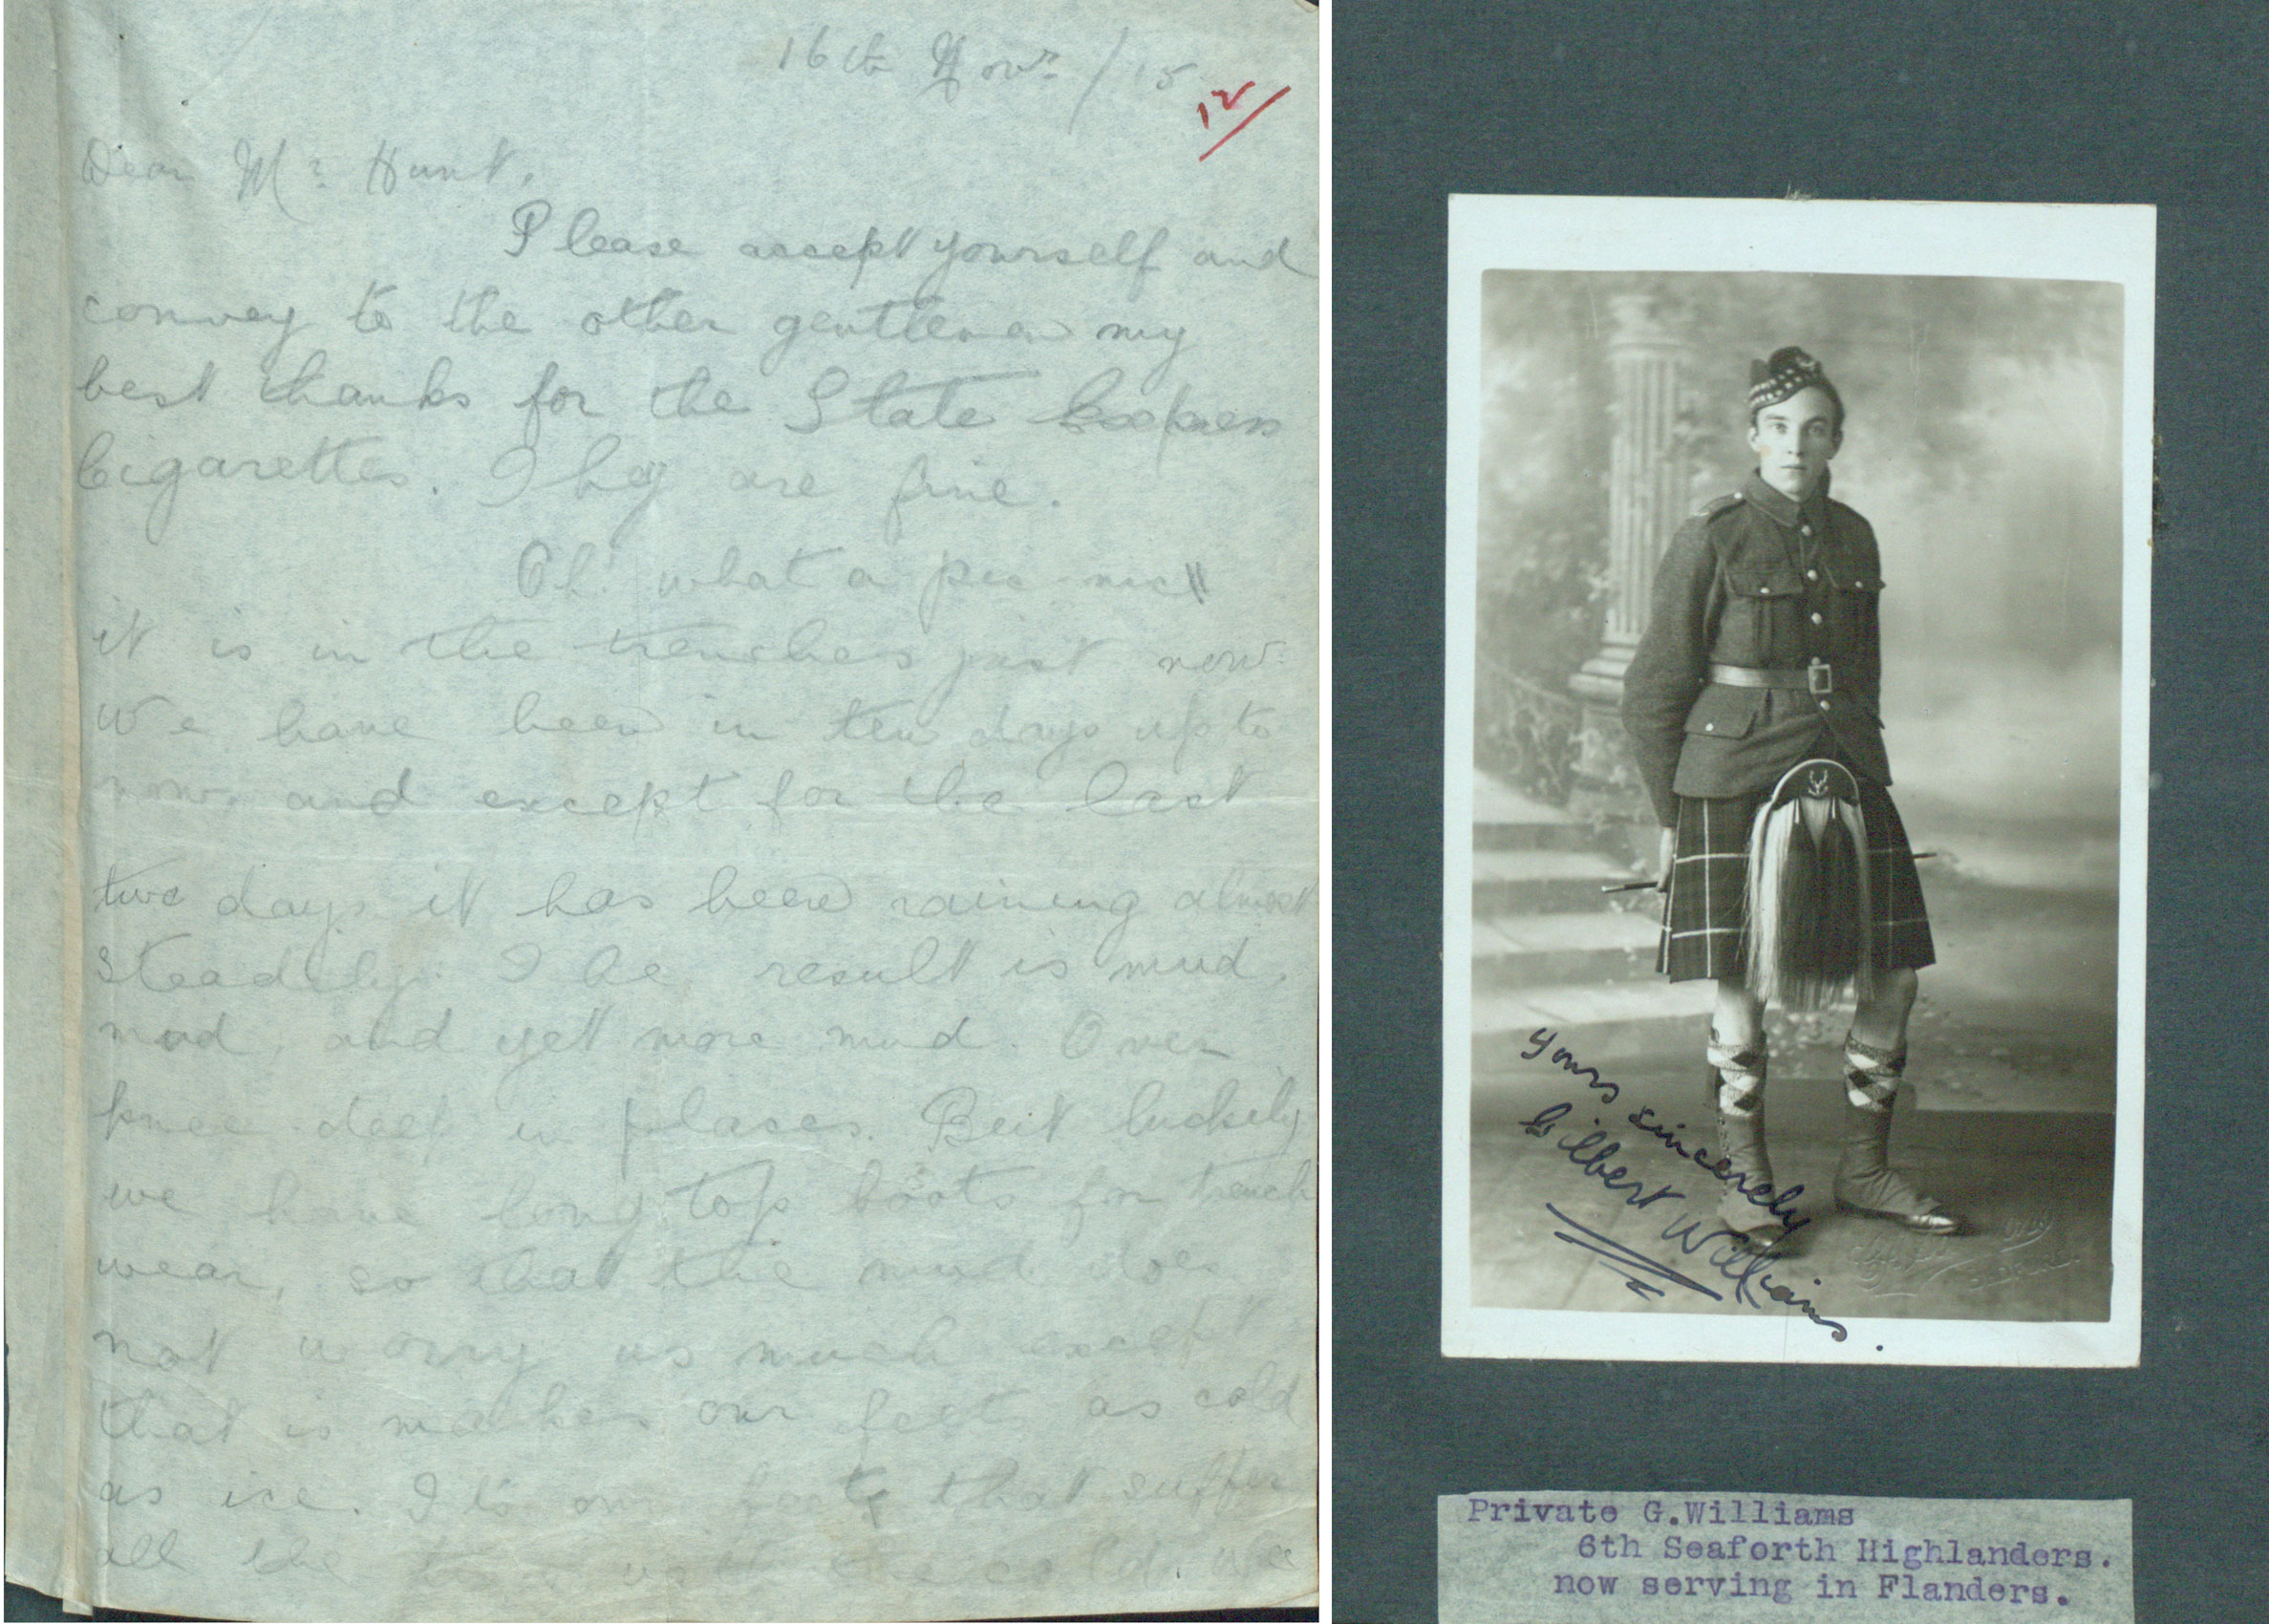 Photo accompanying letter shows a man in a uniform and kilt. The photo is signed ‘Yours sincerely, Gilbert Williams’.